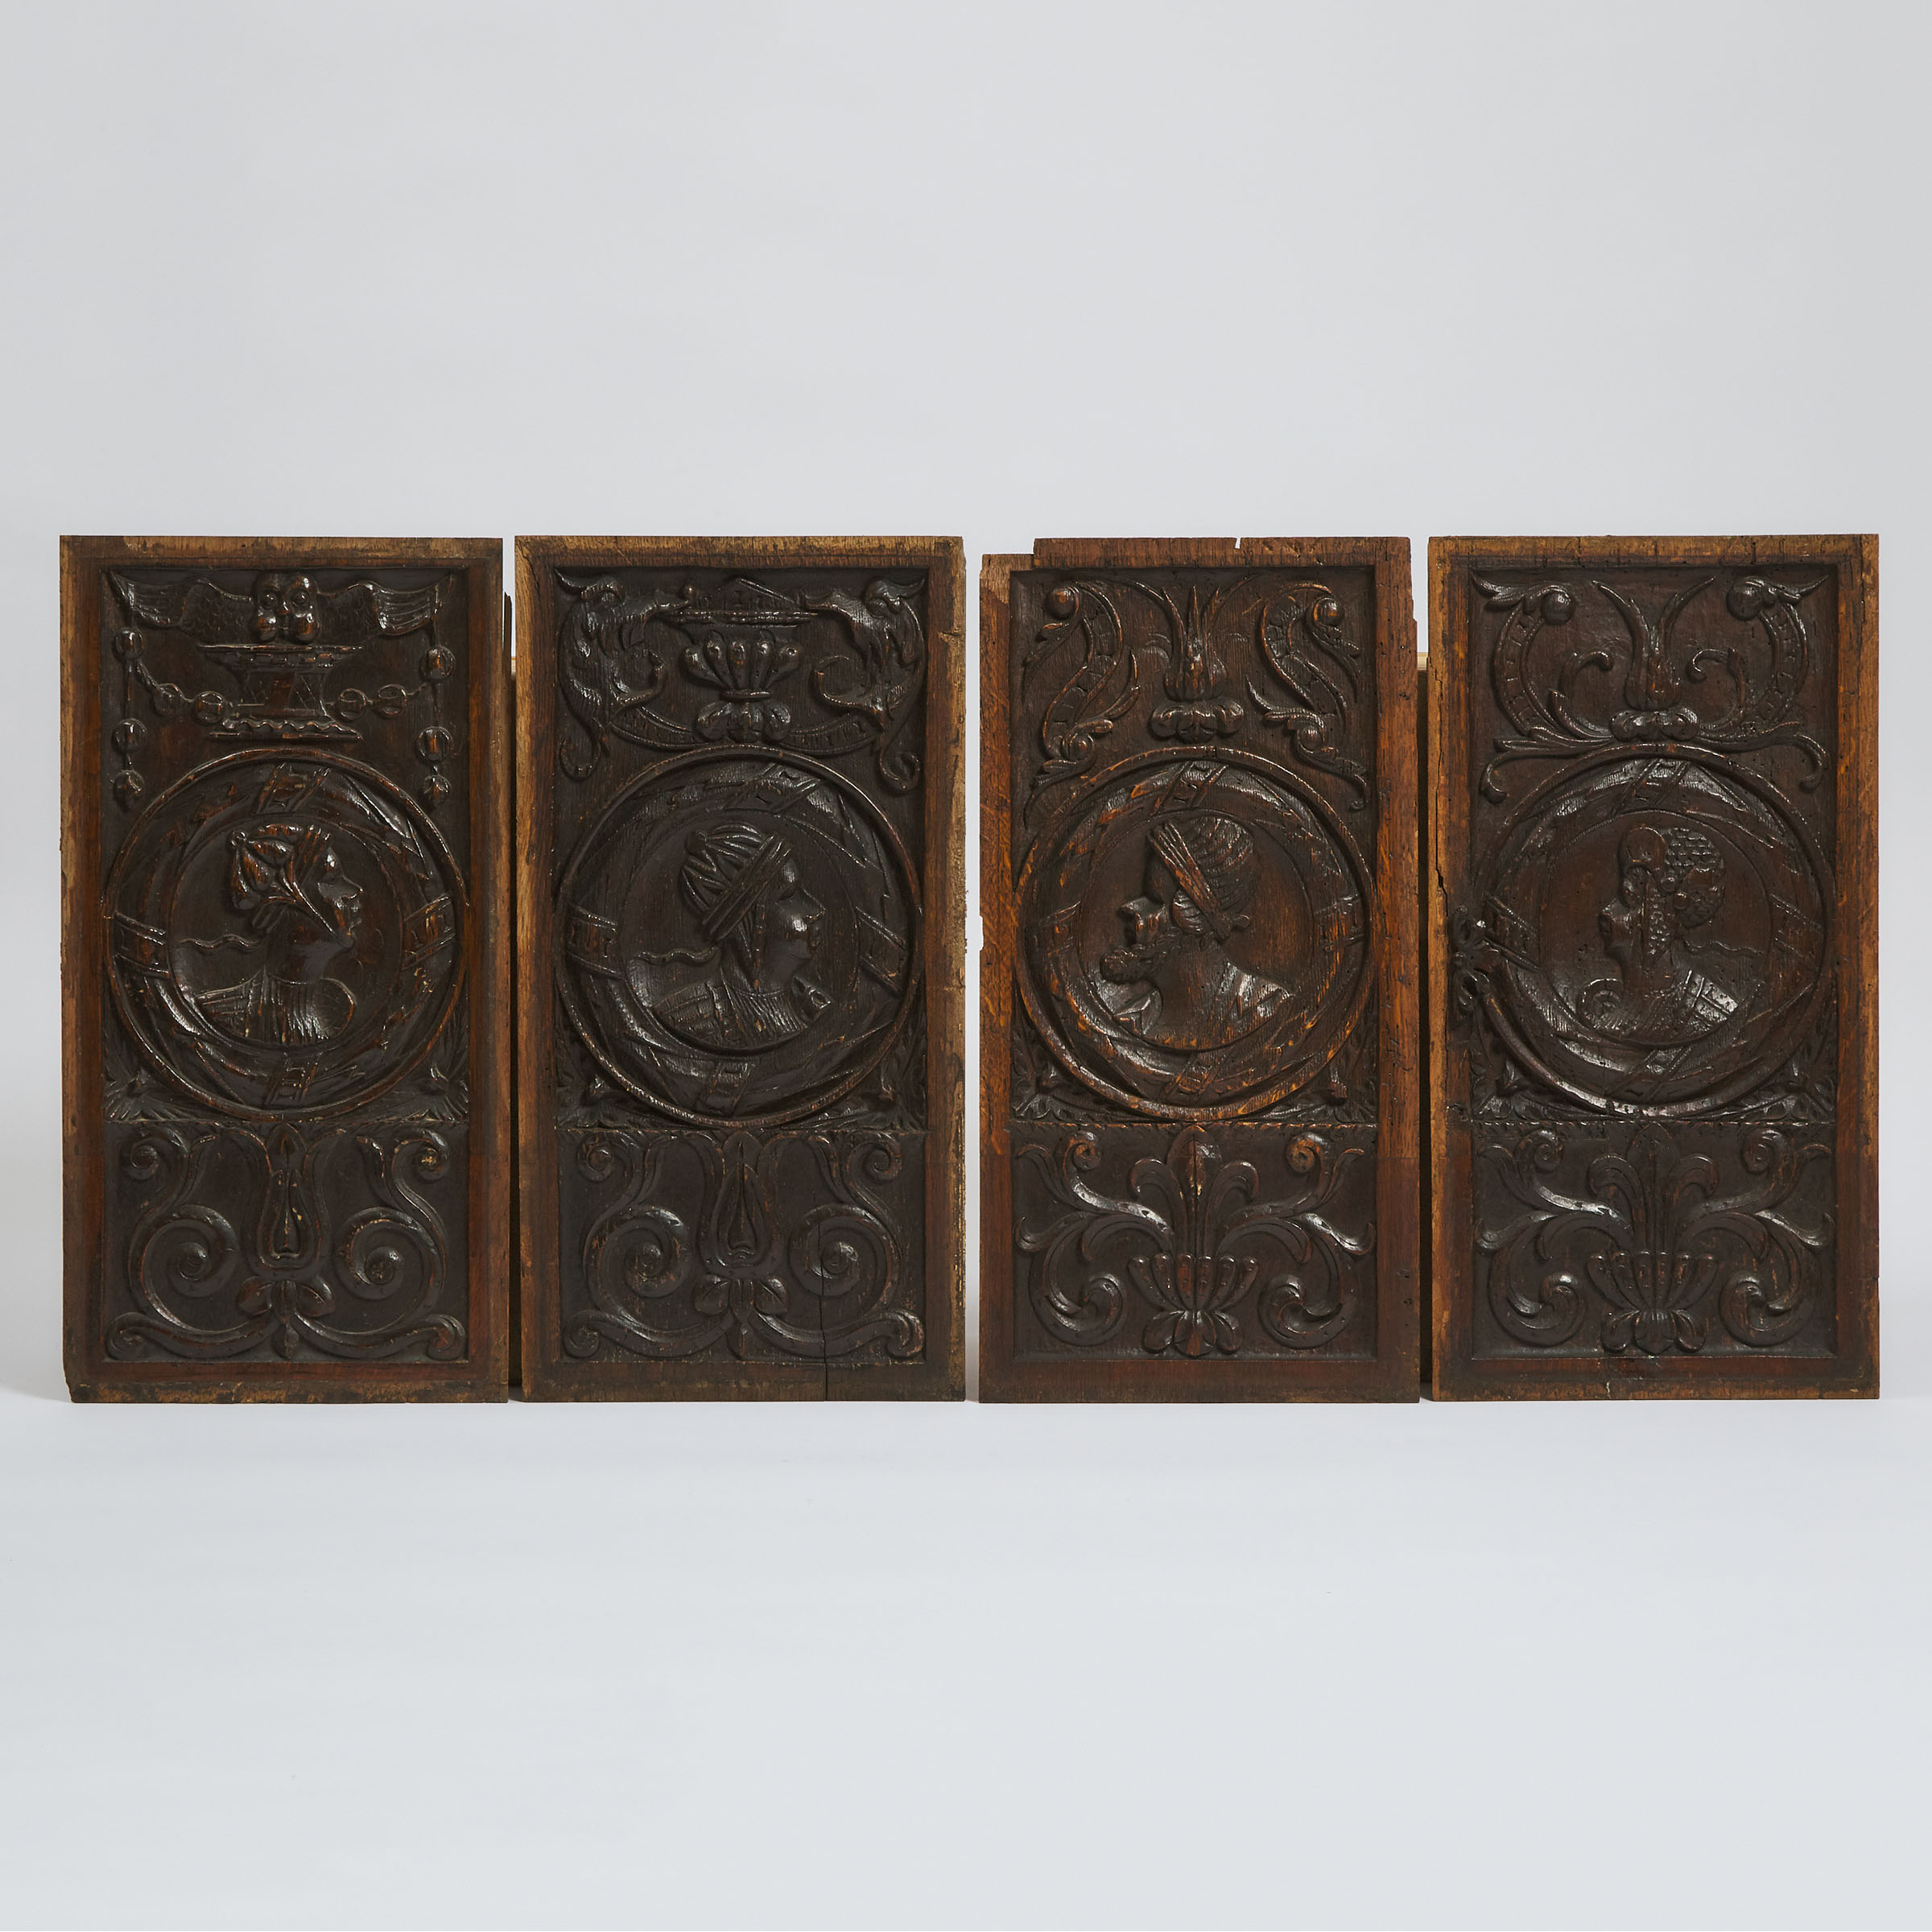 Matched Set of Four English Relief Carved Oak Romayne Panels, 16th century and later